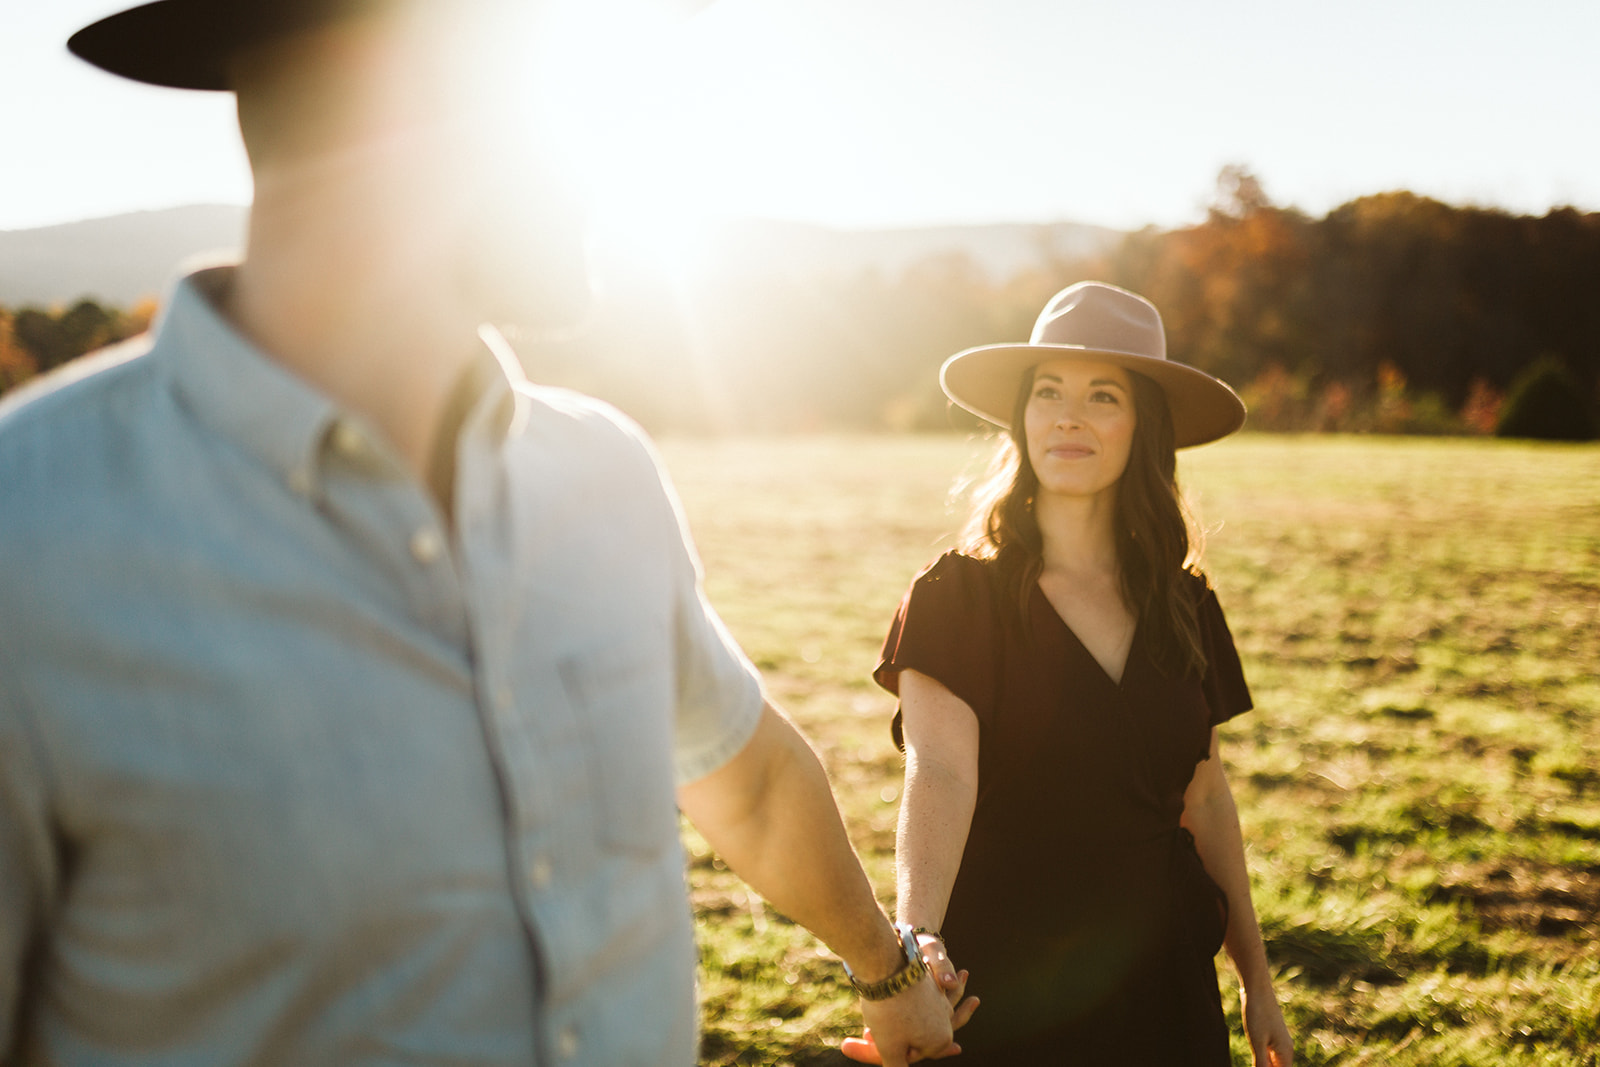 Engagement Photo Ideas | Poses for Couples | Truly Engaging